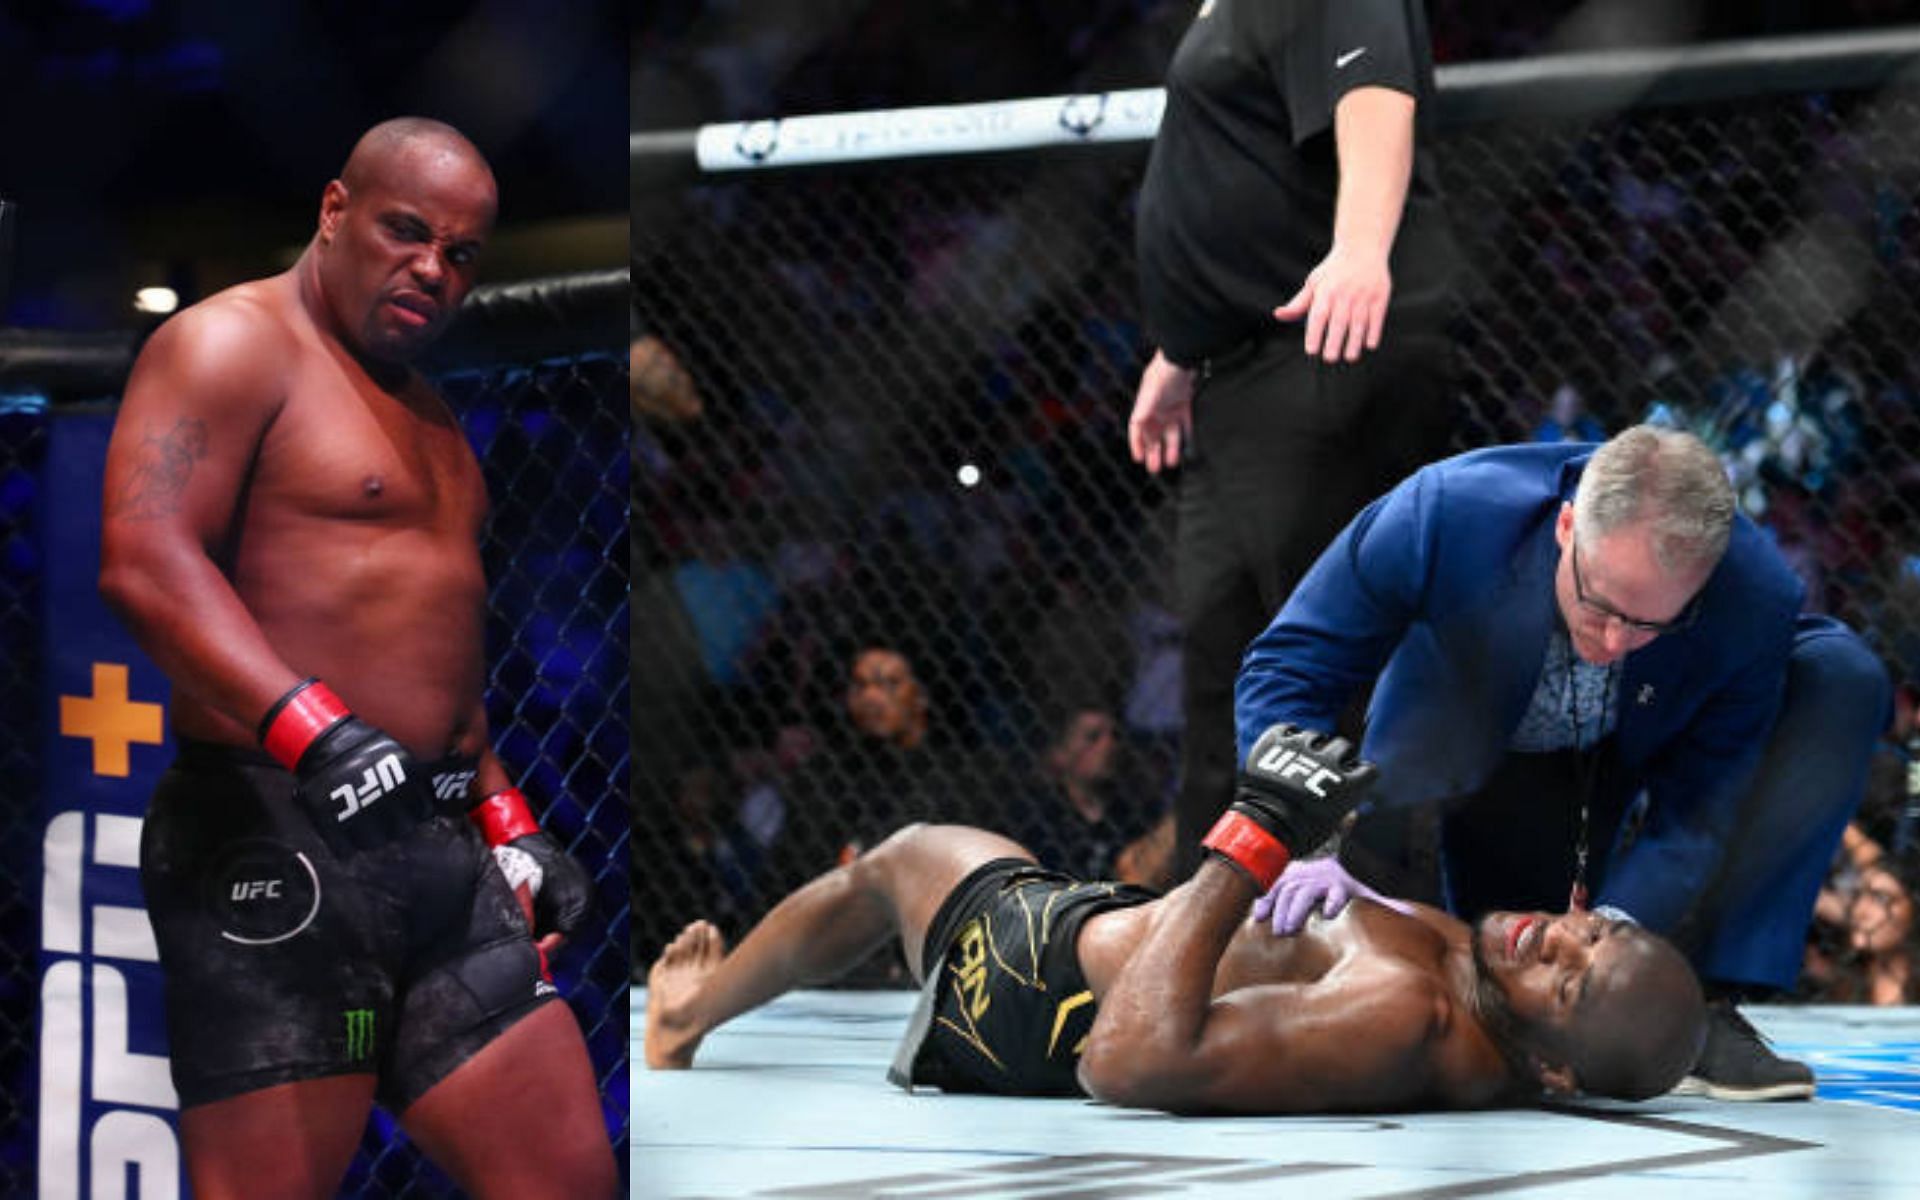 Daniel Cormier (left); Kamaru Usman after being knocked out (right)